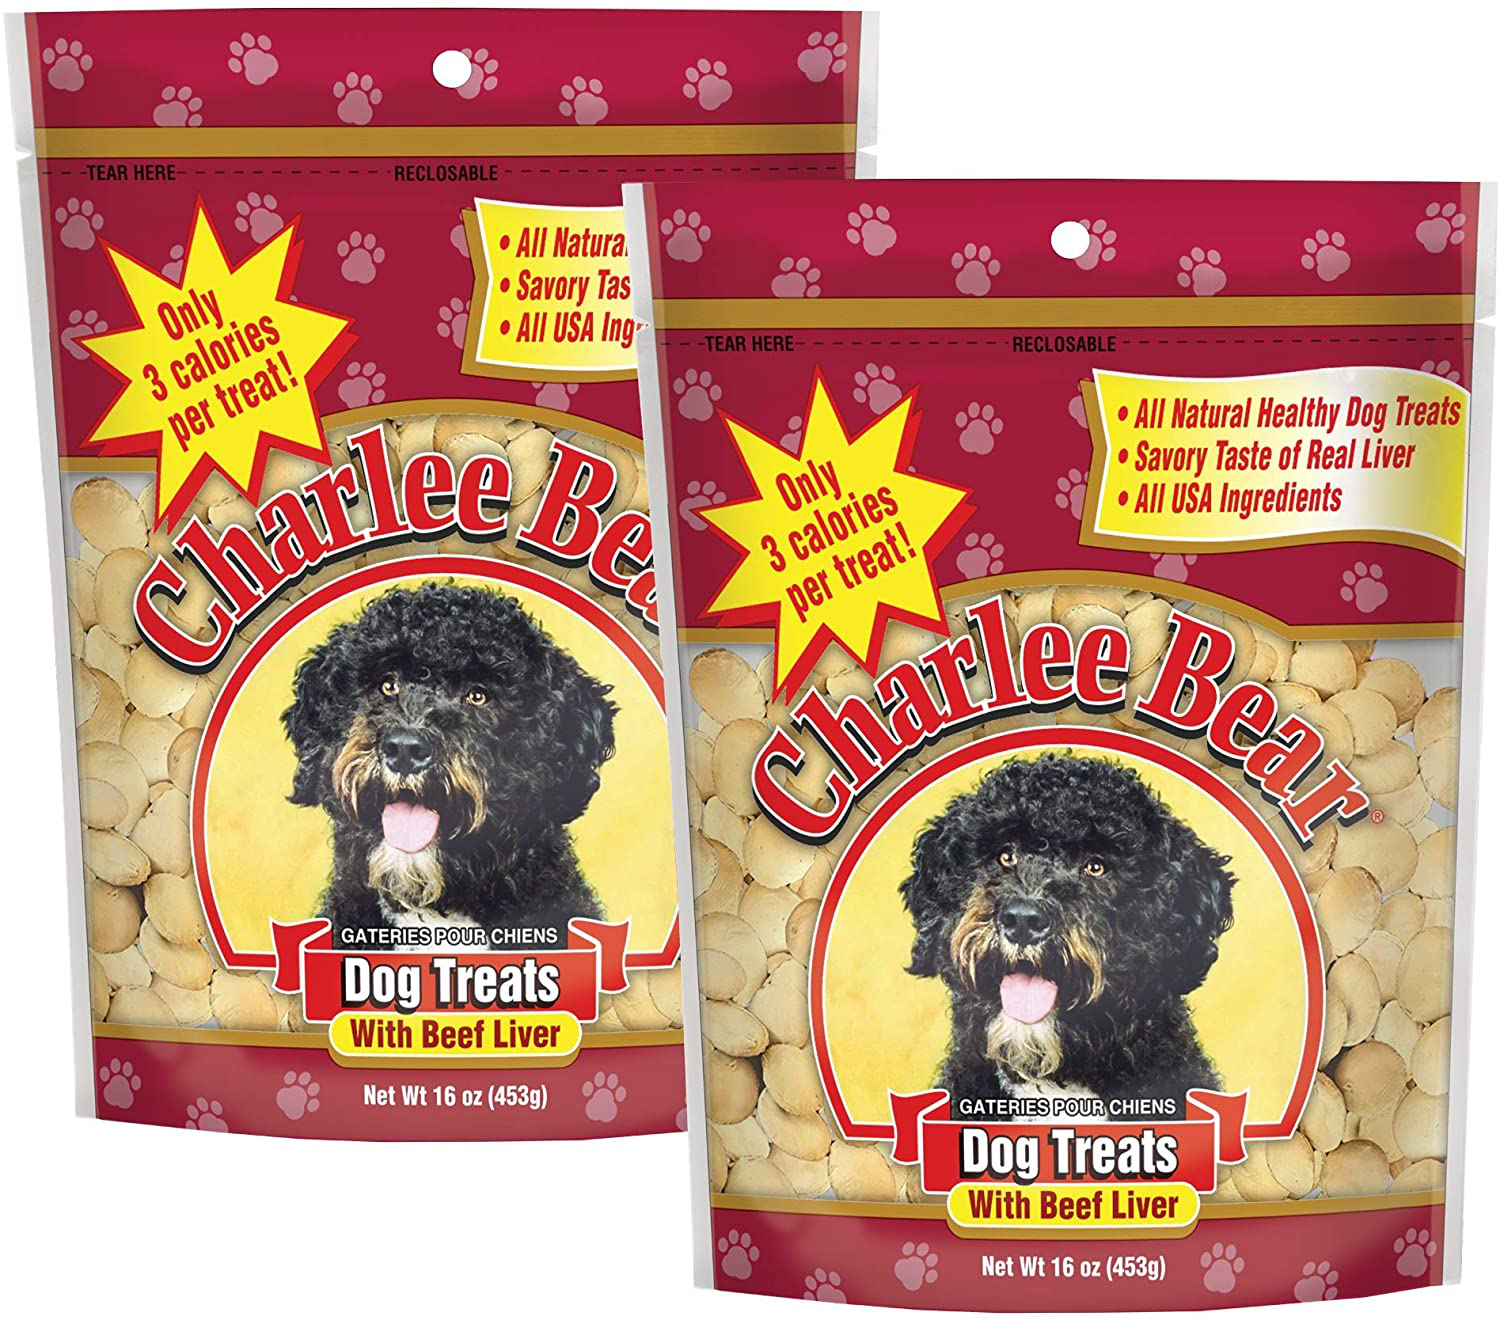 Charlee Bear Original Crunch Beef Liver Dog Treats, 16 Oz - Made in the USA, Natural Training Treats for Dogs Animals & Pet Supplies > Pet Supplies > Dog Supplies > Dog Treats Charlee Bear 1 Pound (Pack of 2)  